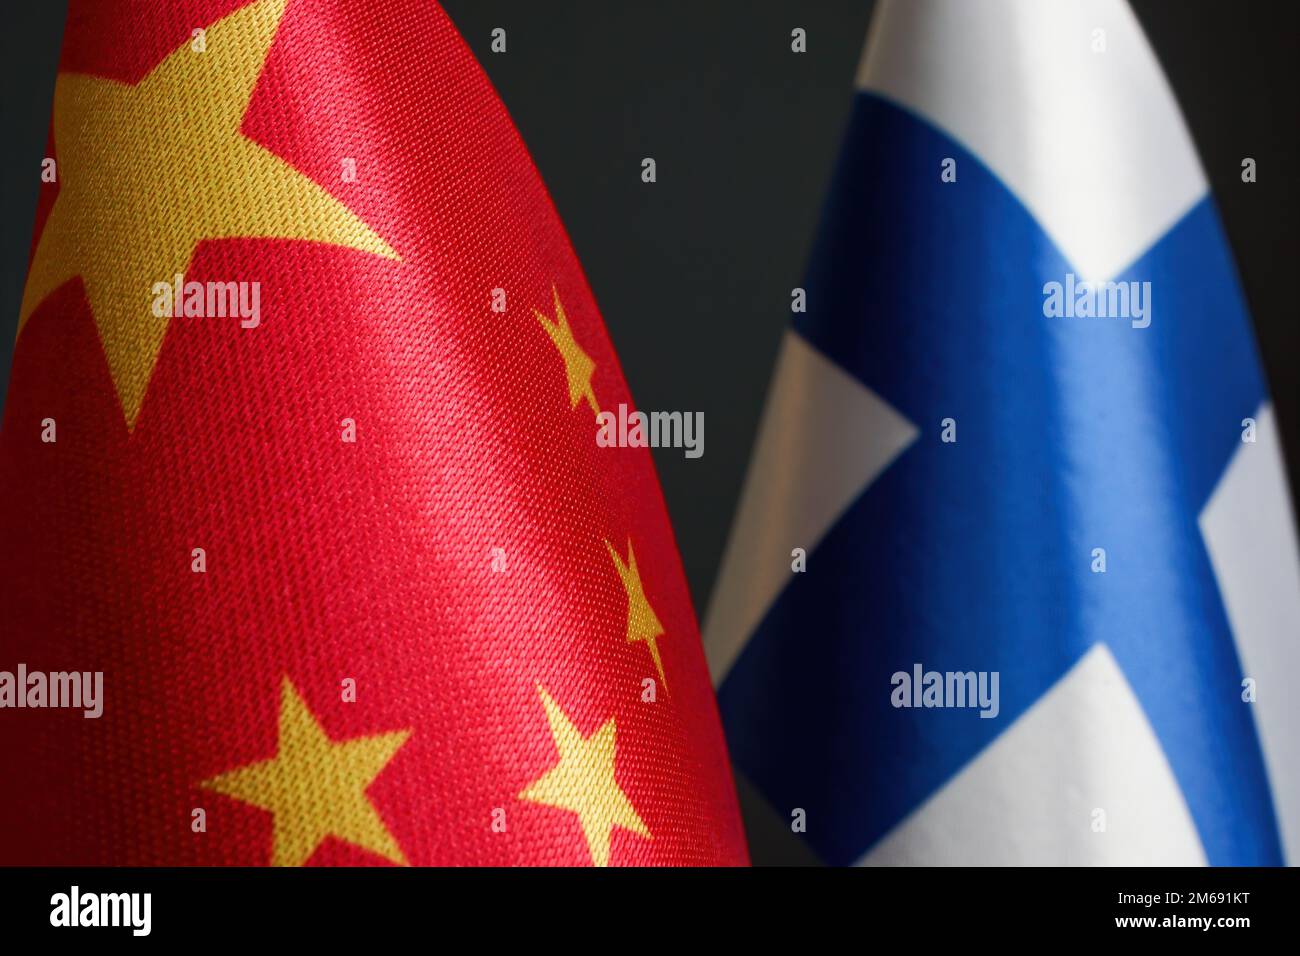 Close-up of small flags of China and Finland. Stock Photo